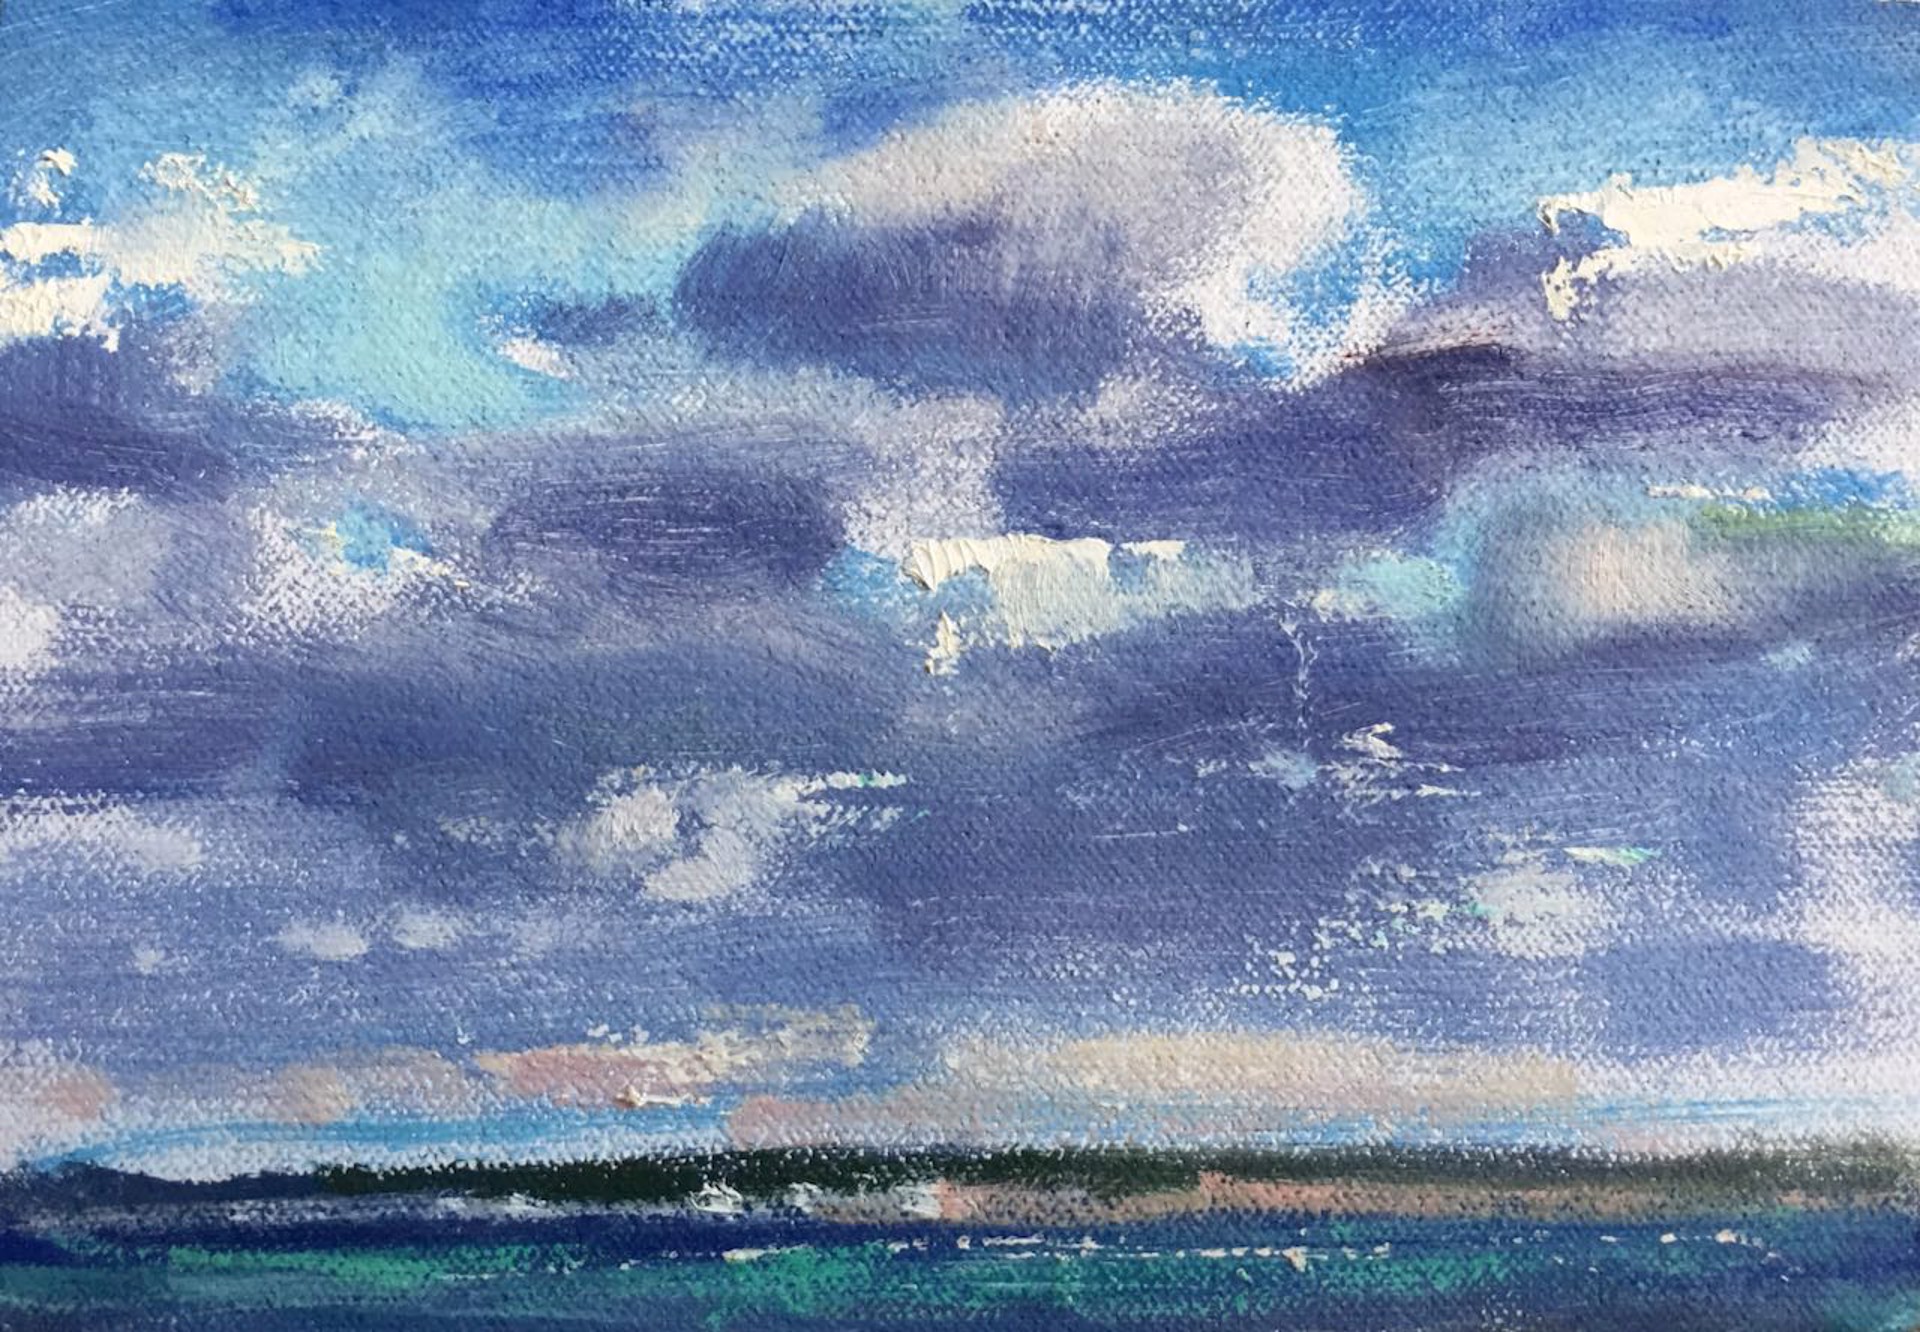 Clouds over Provincetown #2 by Donald Beal